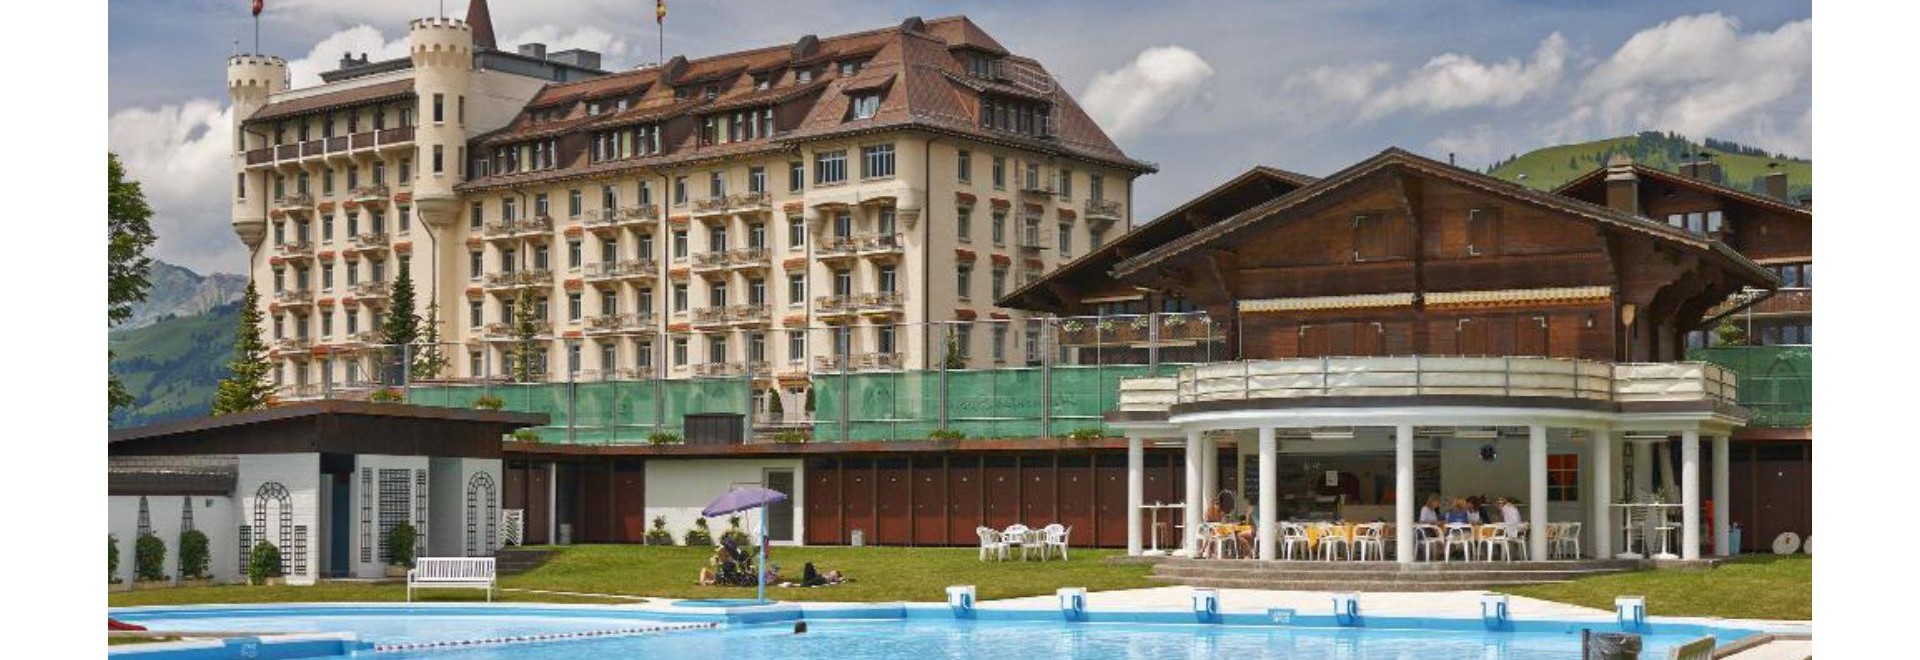 Gstaad Palace, Switzerland - Book. Travel. Play.